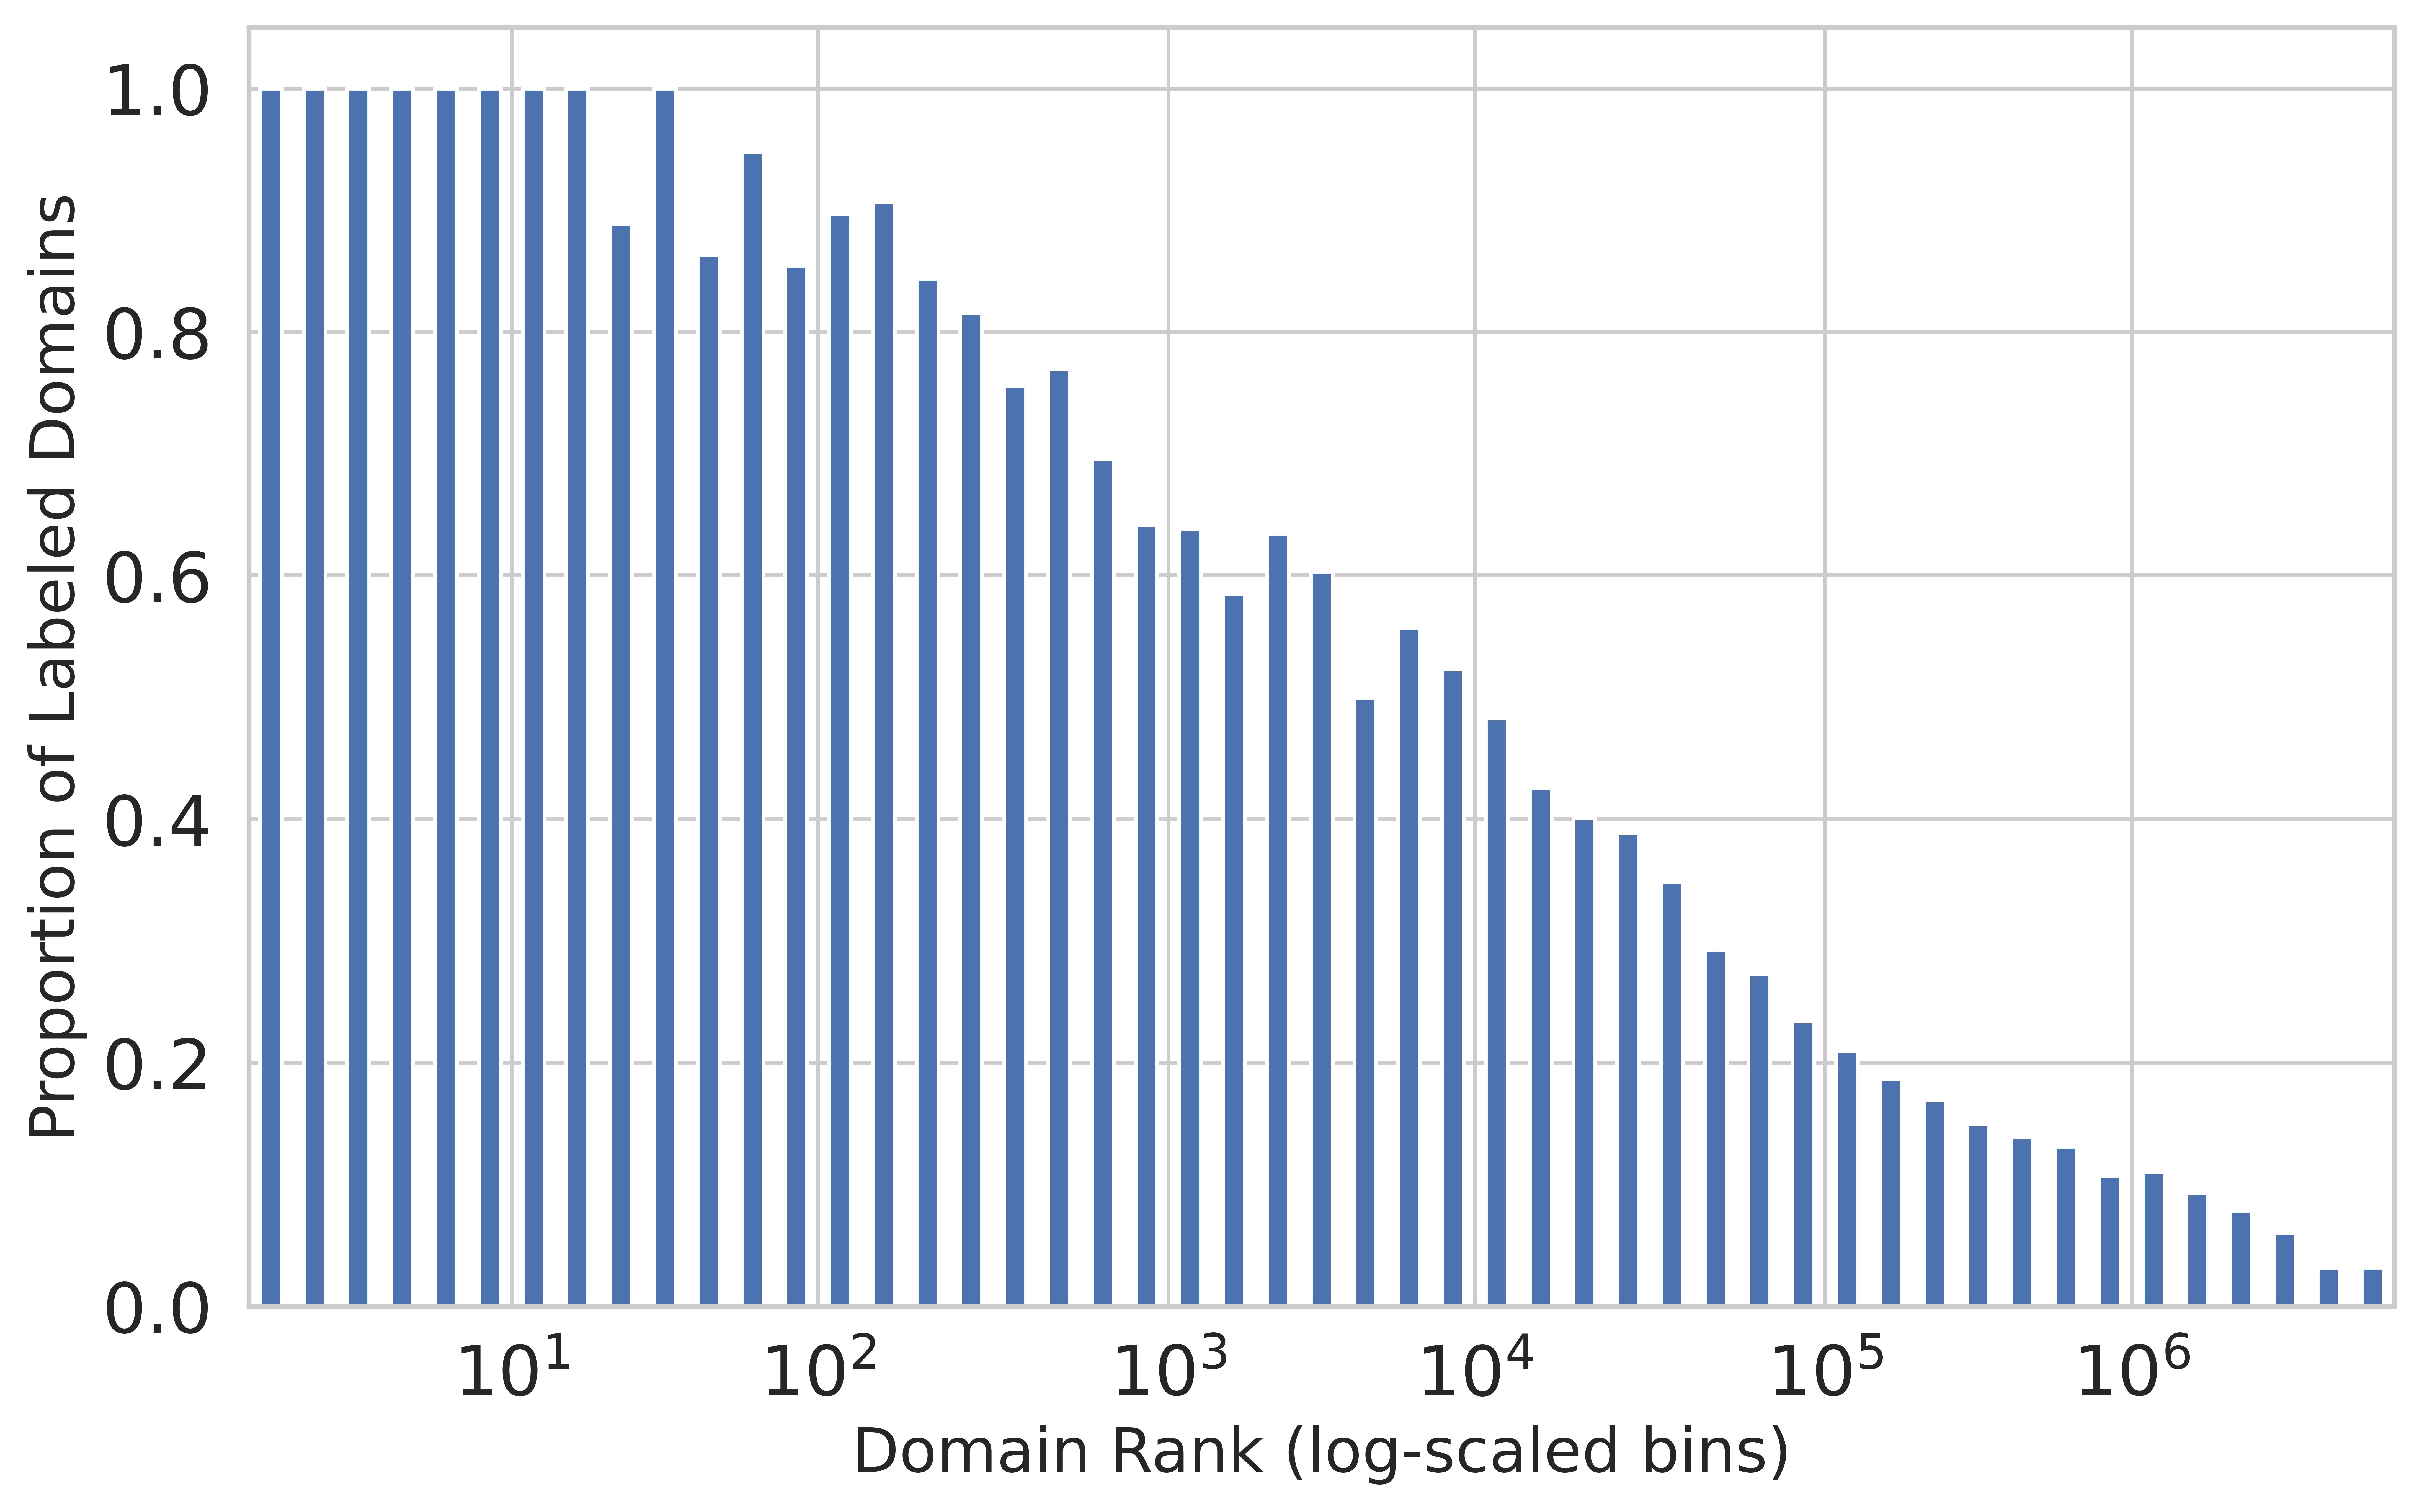 Figure 1. Labeling of content relative to popularity of domains, derived from telemetry. Chart shows logarithmic plot of domains versus proportion with labeling, with almost all of sites in the top 100 labeled but less popular sites having decreasing levels of coverage for each power of ten they're ranked in.